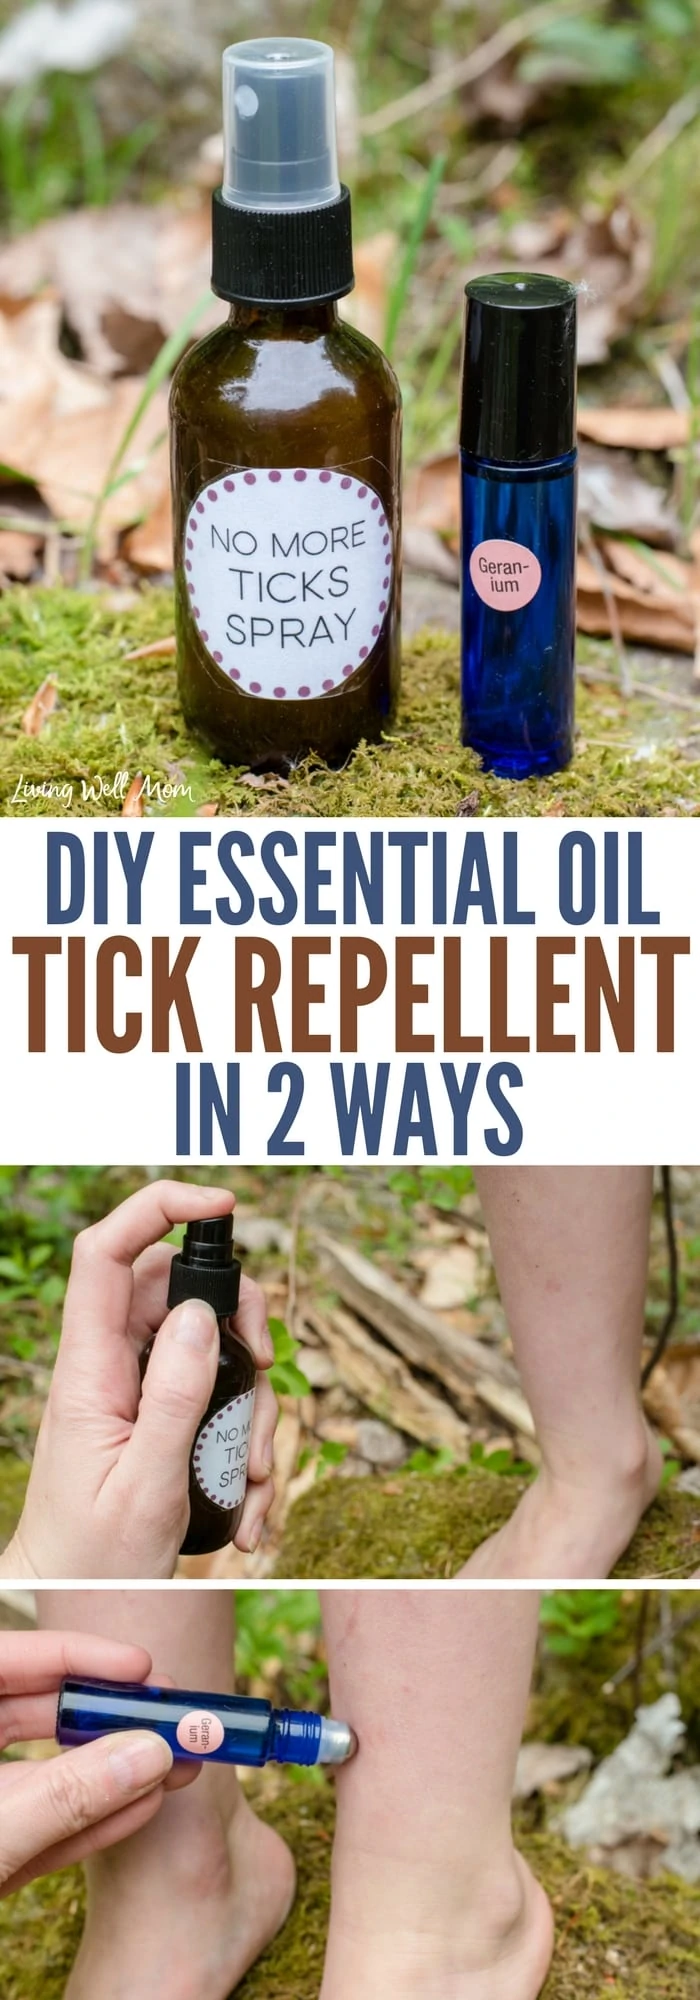 essential oil tick repellent collection of photos